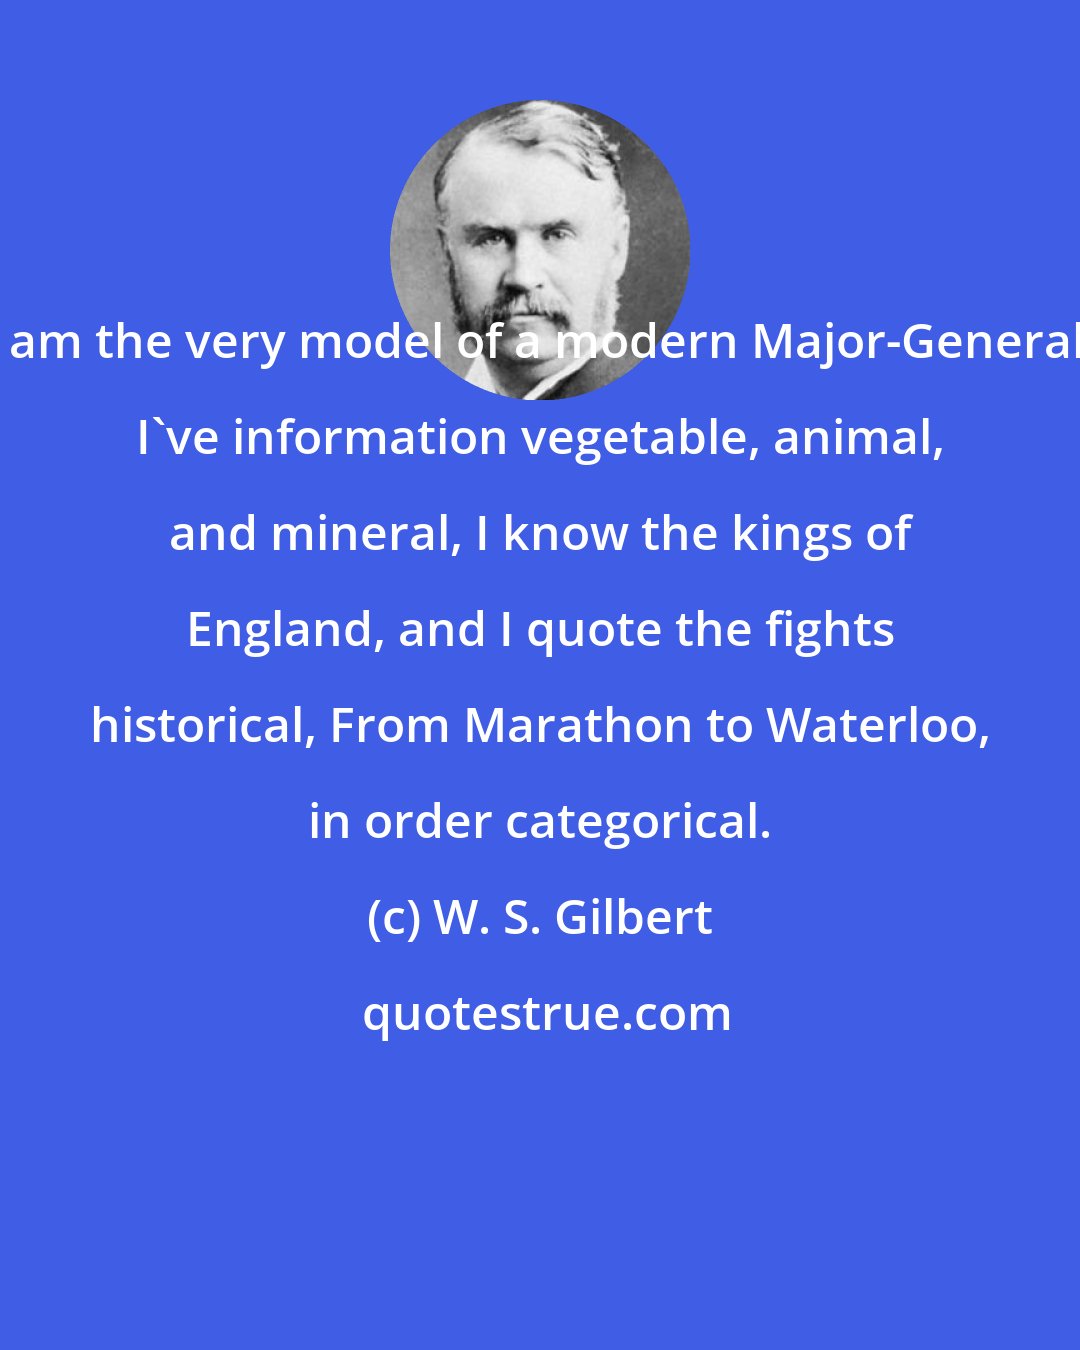 W. S. Gilbert: I am the very model of a modern Major-General, I've information vegetable, animal, and mineral, I know the kings of England, and I quote the fights historical, From Marathon to Waterloo, in order categorical.